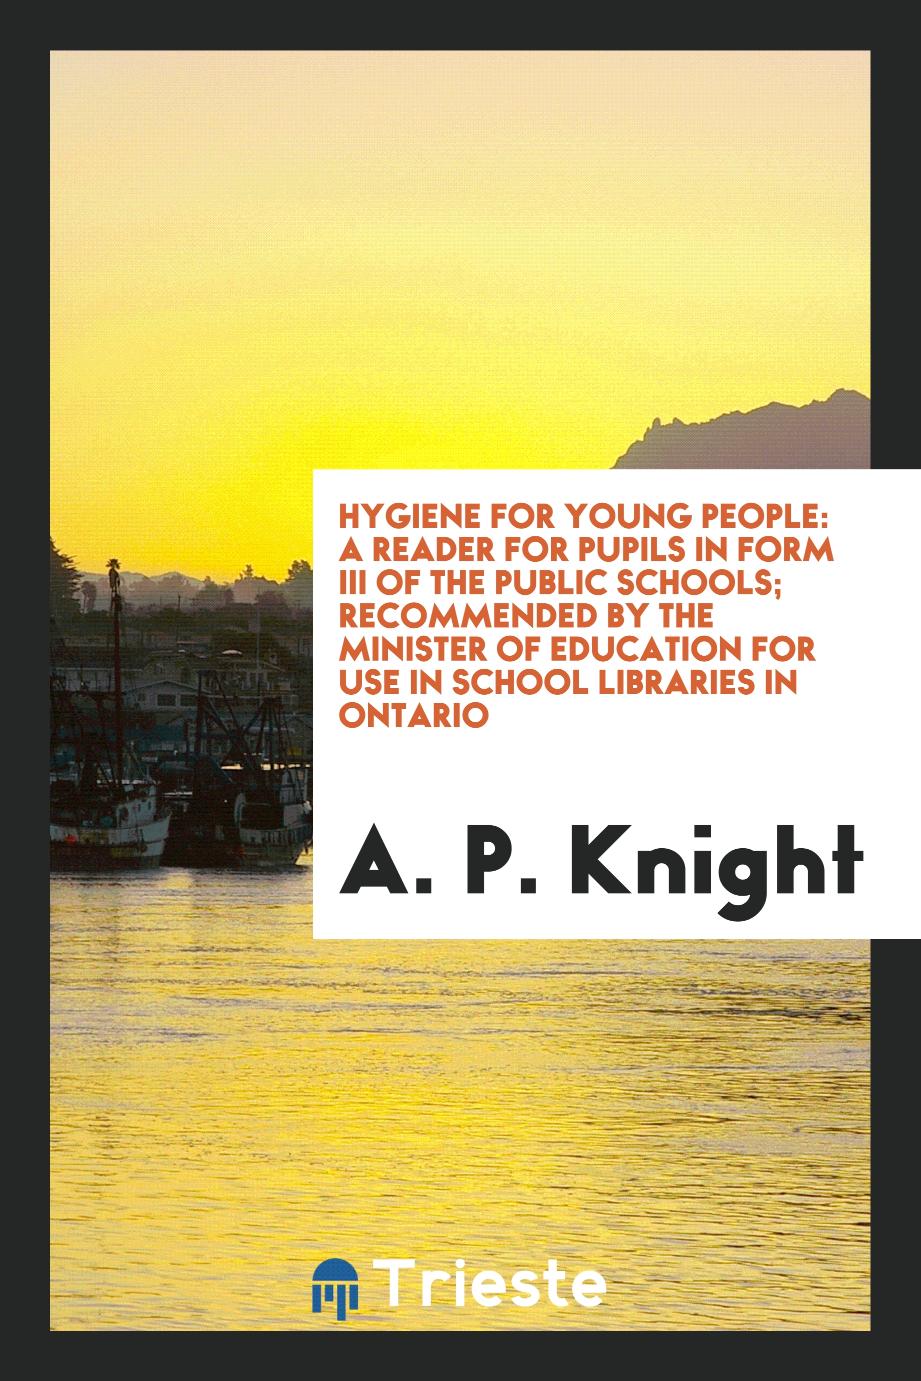 Hygiene for young people: a reader for pupils in form III of the Public Schools; recommended by the Minister of Education for use in school libraries in Ontario